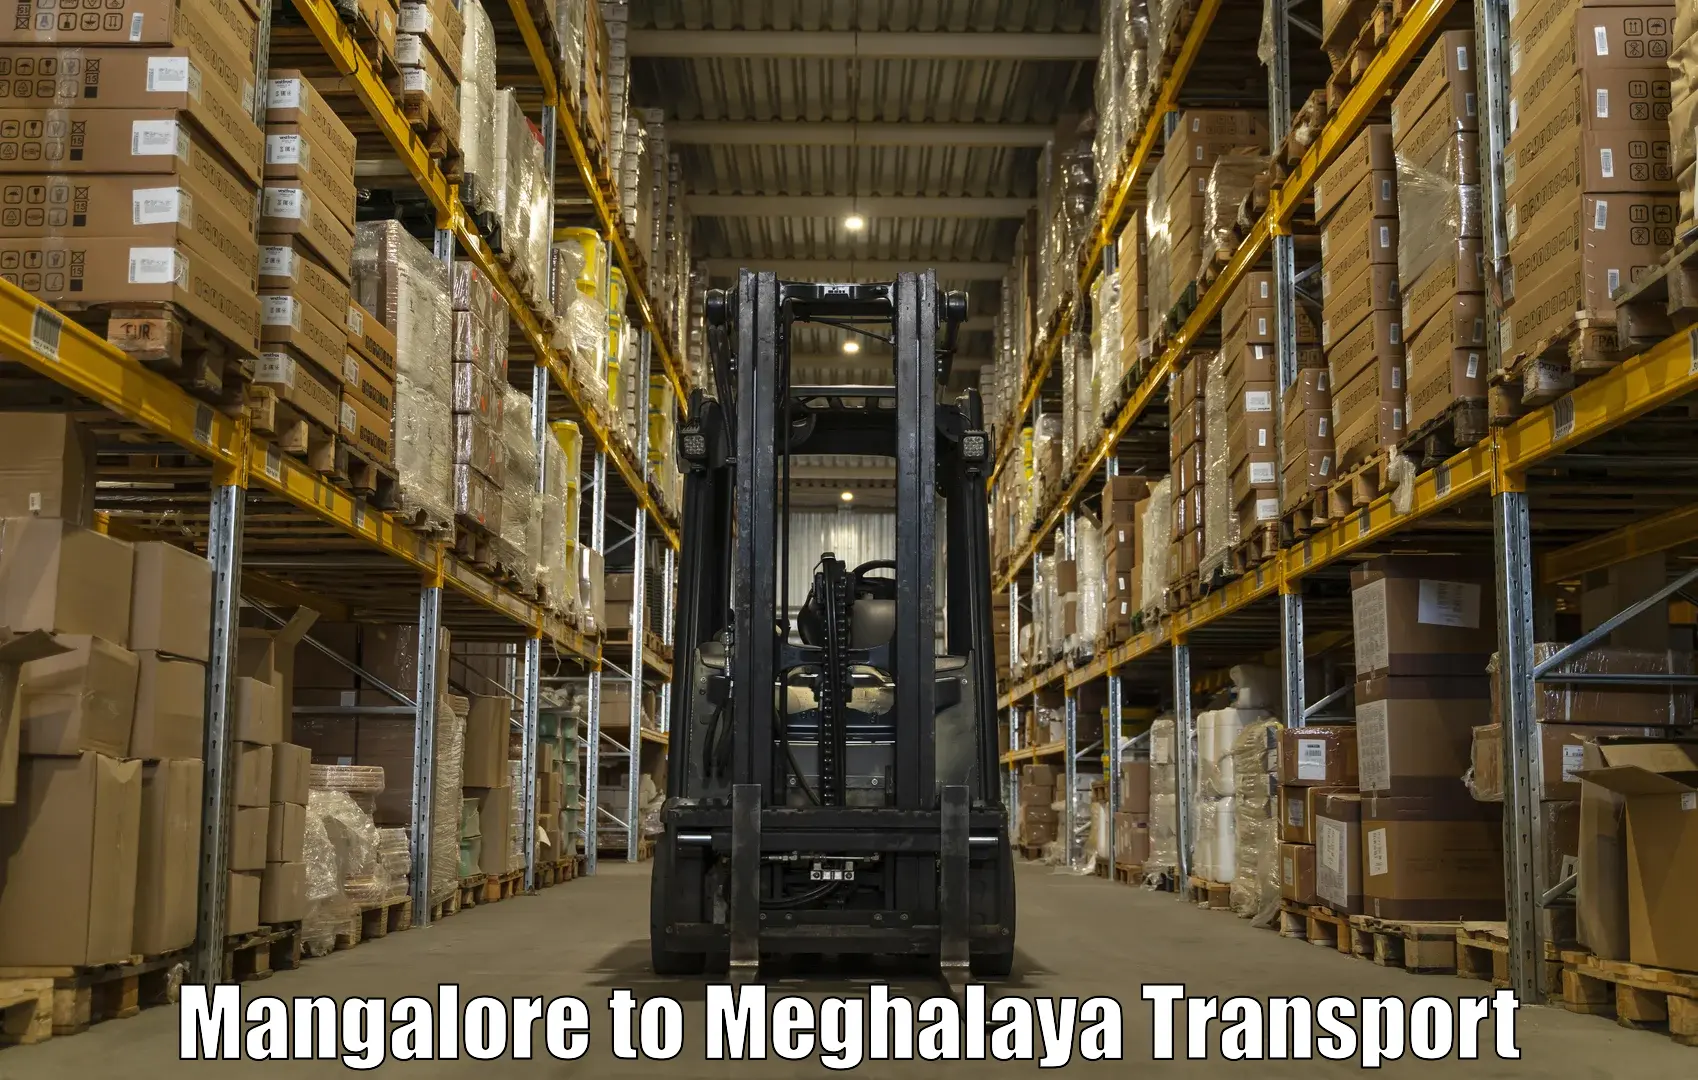 Daily parcel service transport Mangalore to Shillong